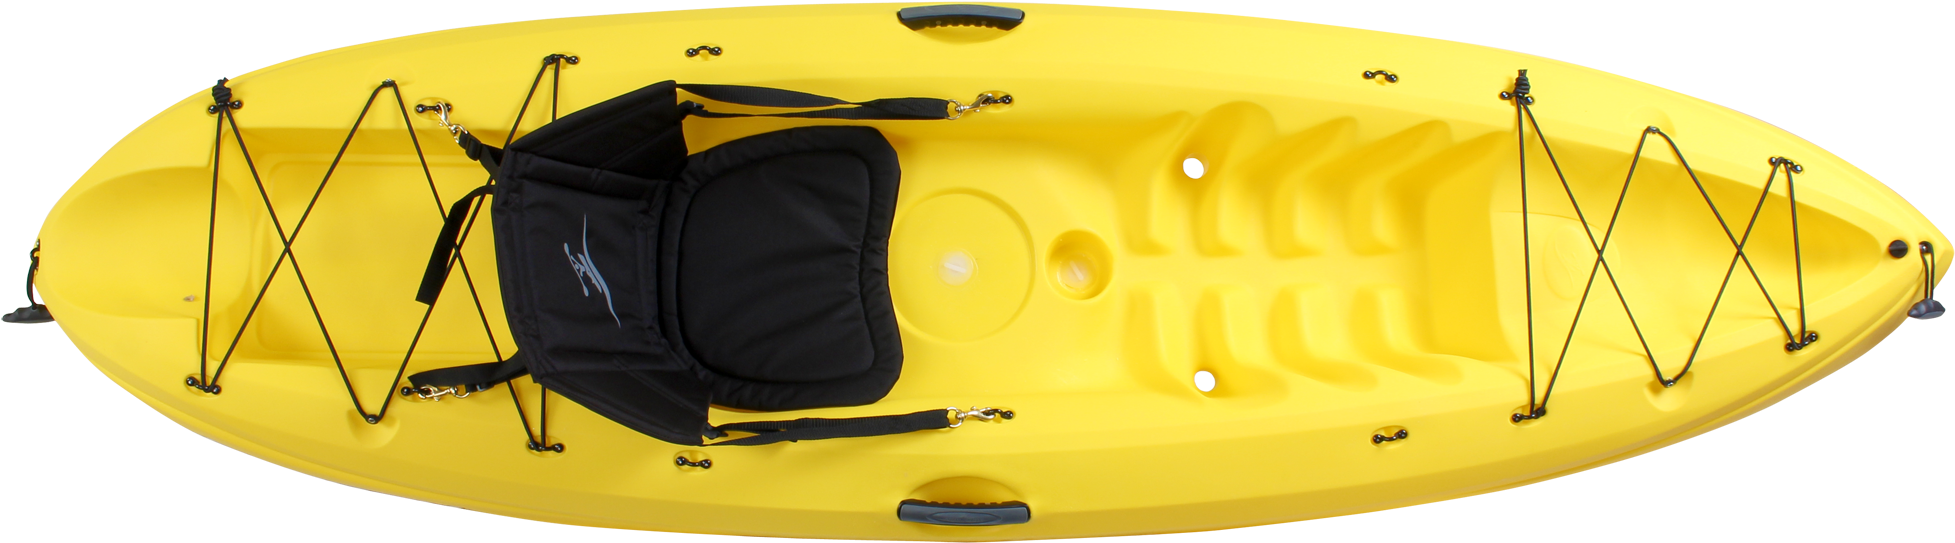 A Yellow Plastic Boat With A Black Seat